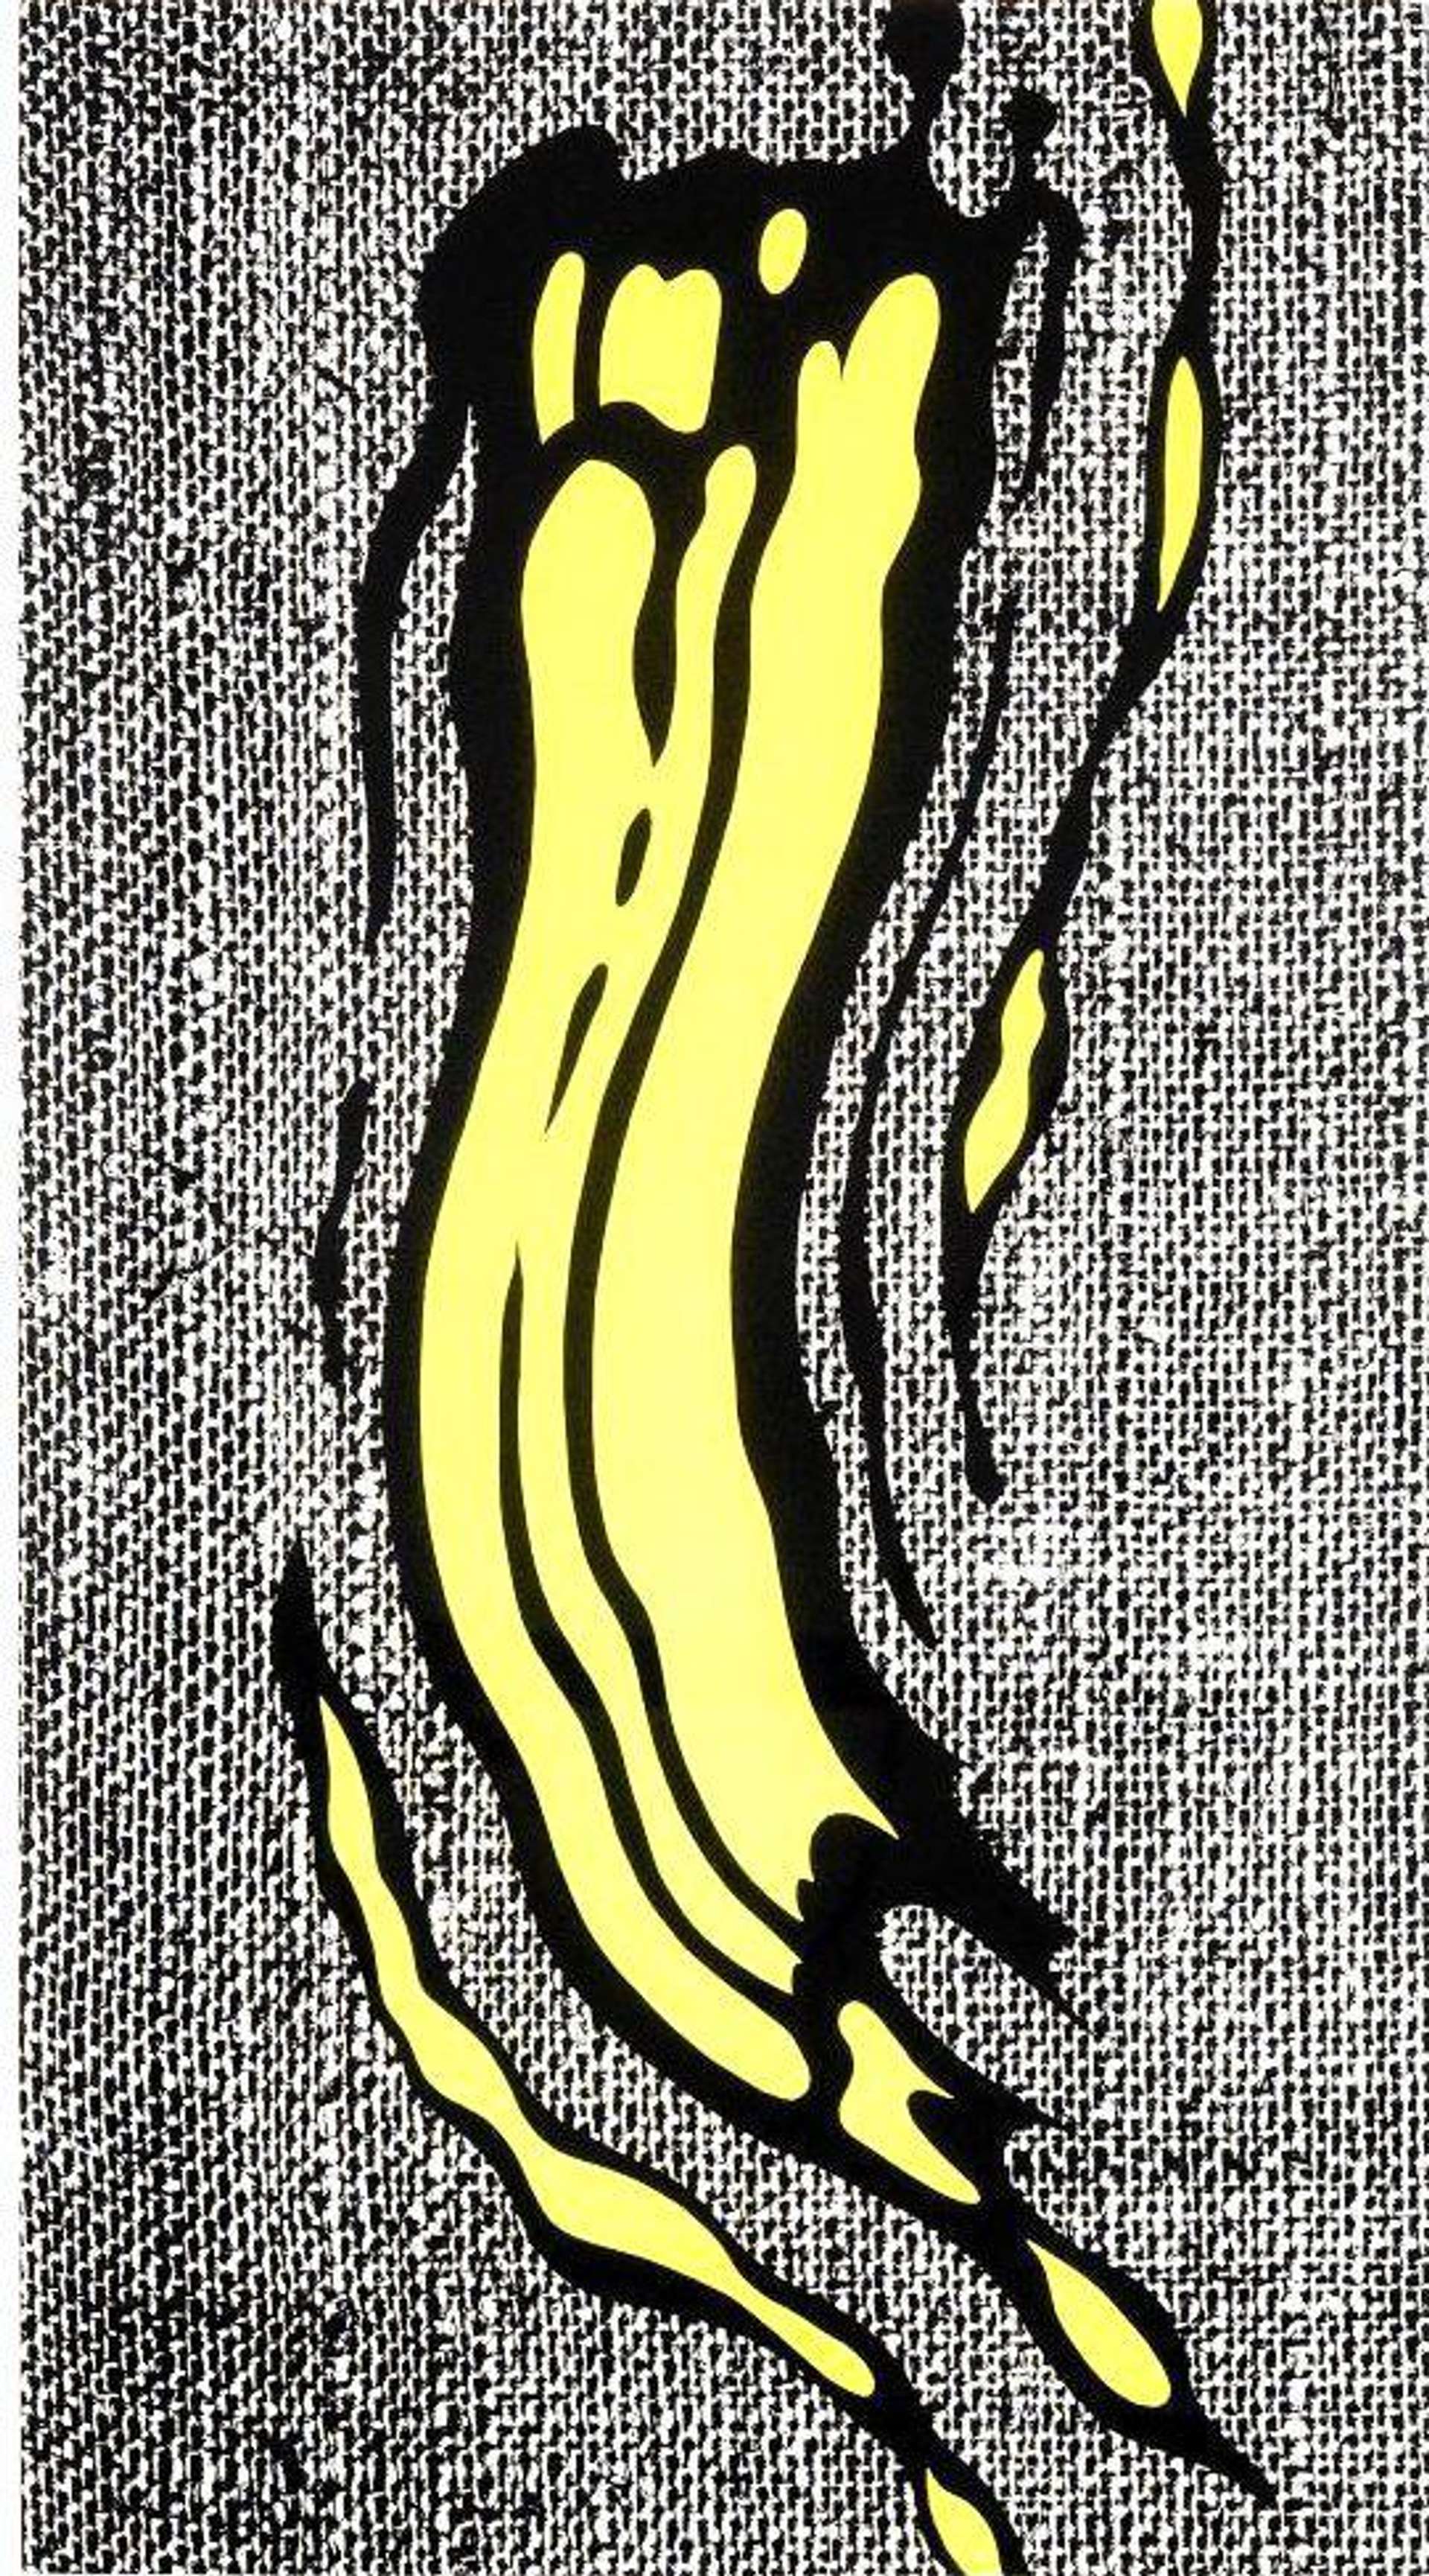 An image of the artwork Yellow Brushstroke by Roy Lichtenstein. It shows a graphic-style yellow brushstroke, against a textured grey background.